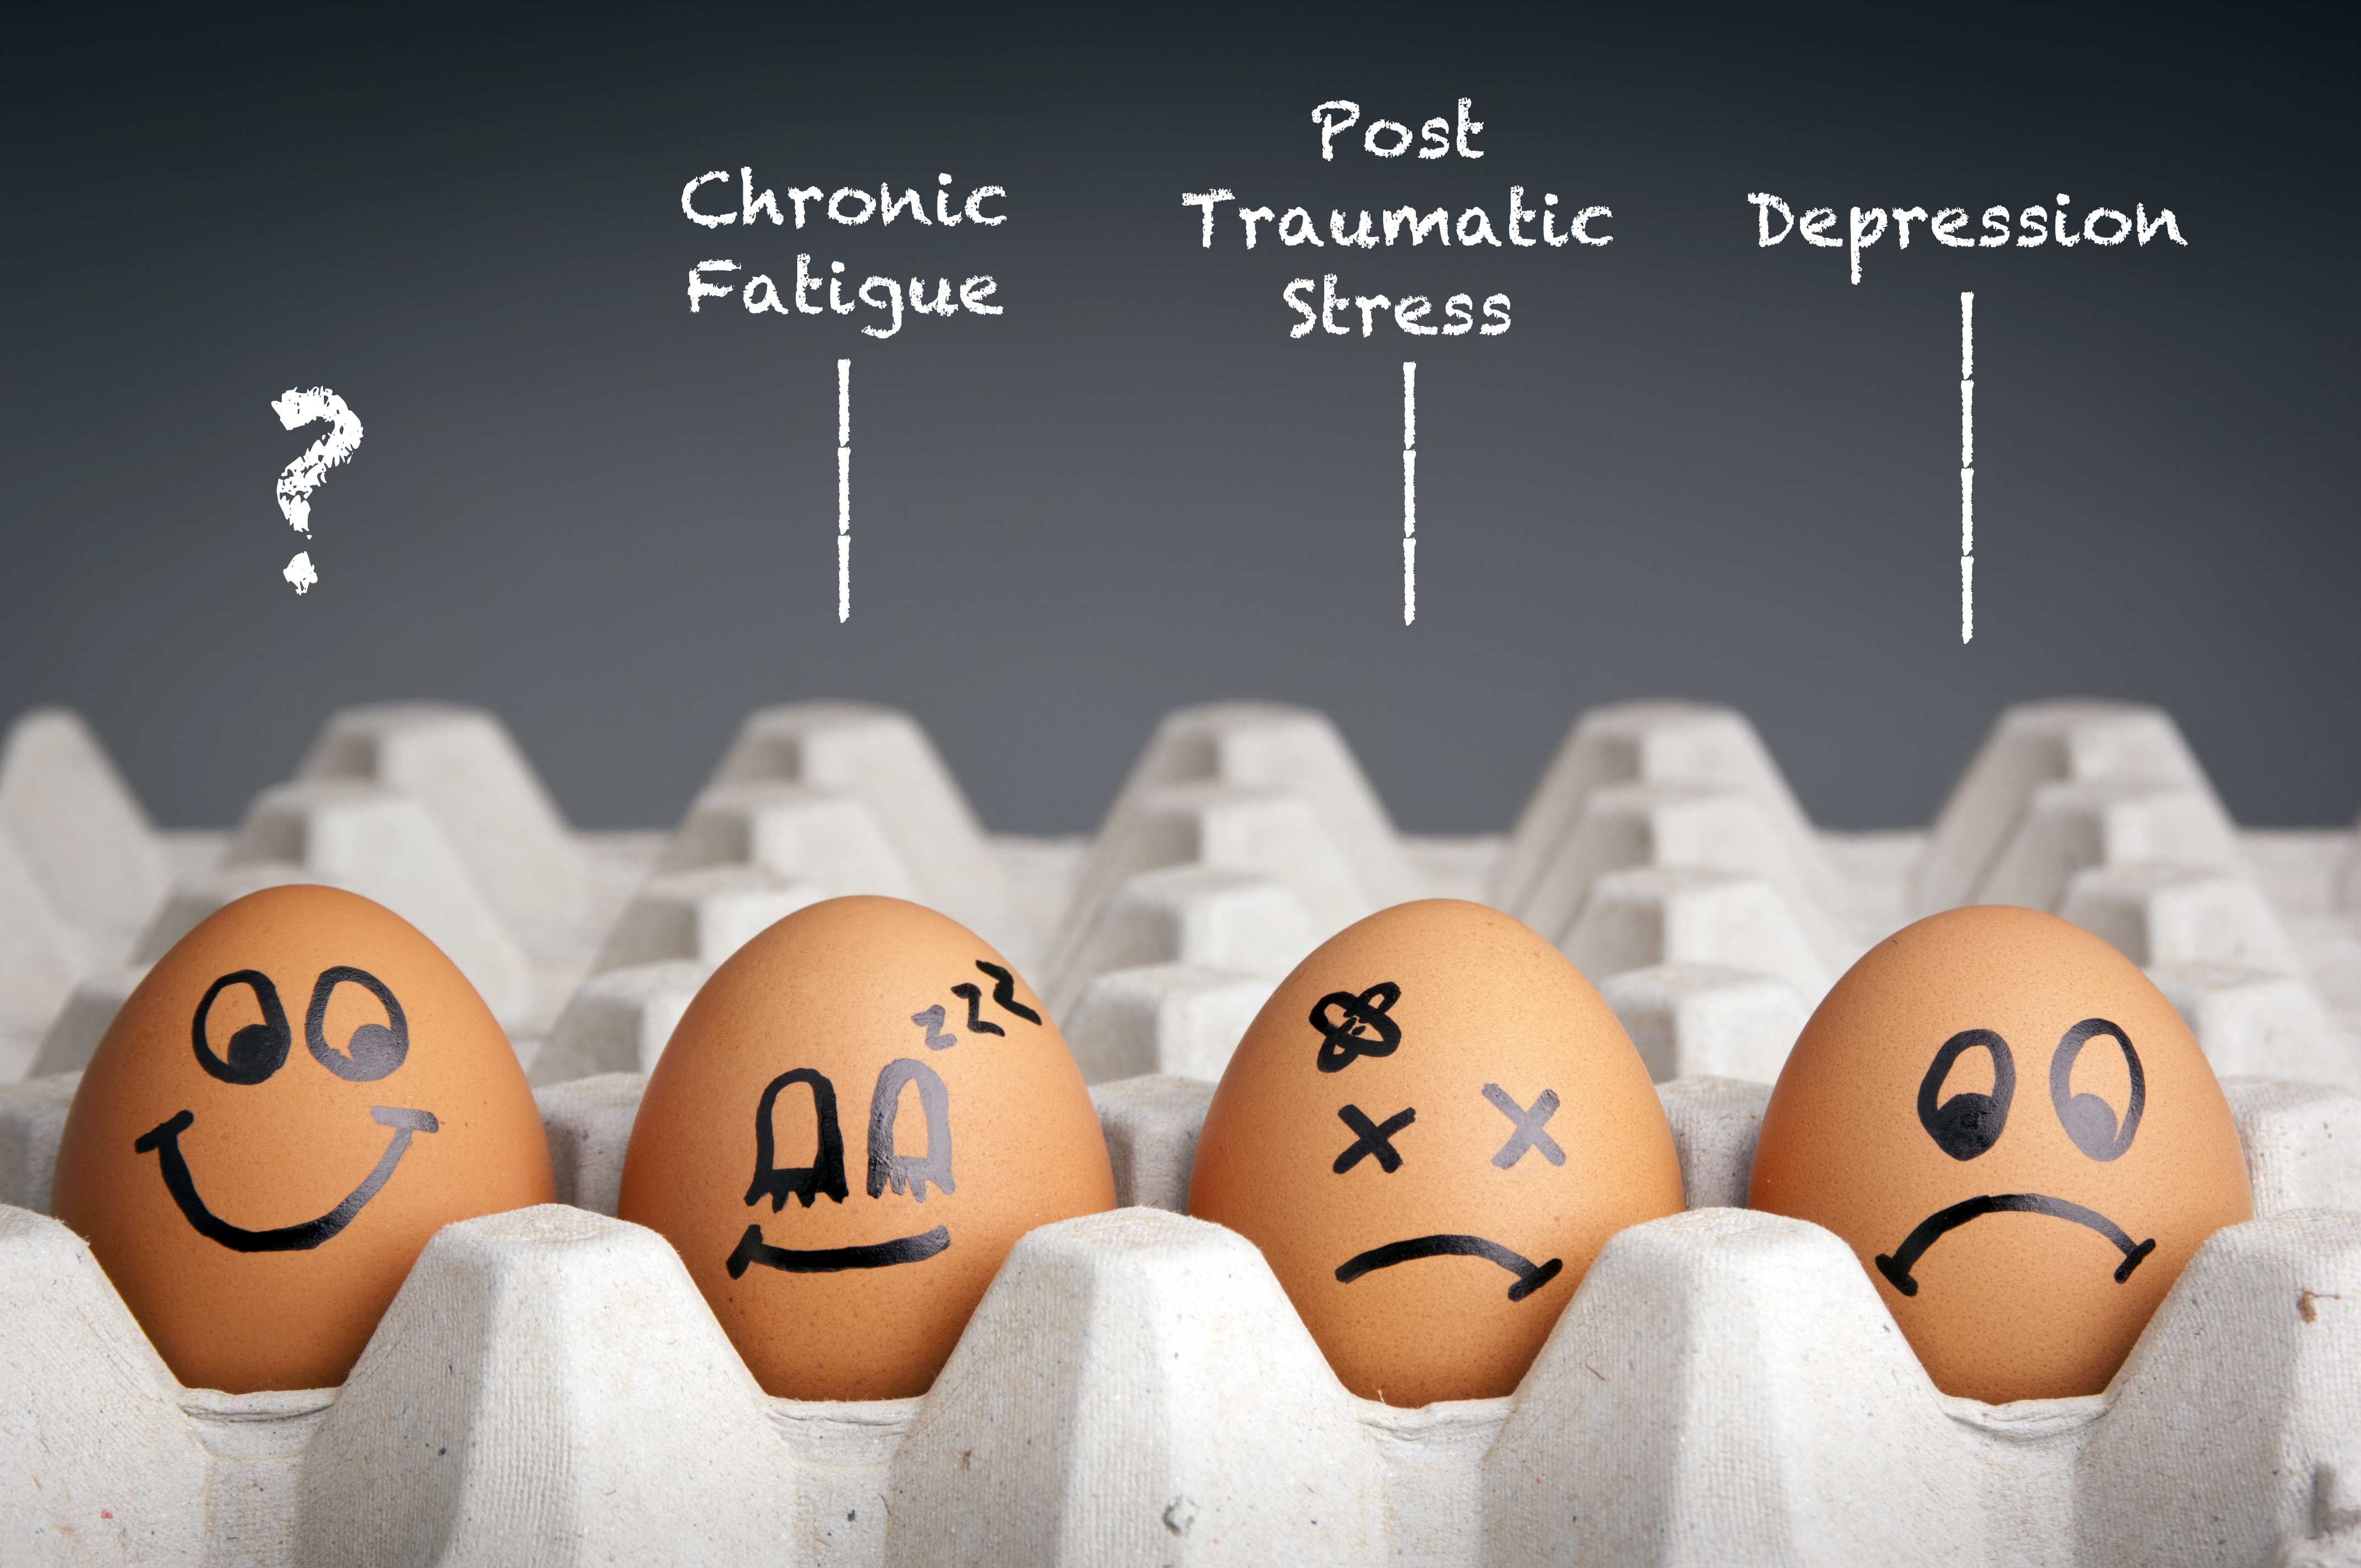 pictures of fragile eggs with mental health symptoms written on them